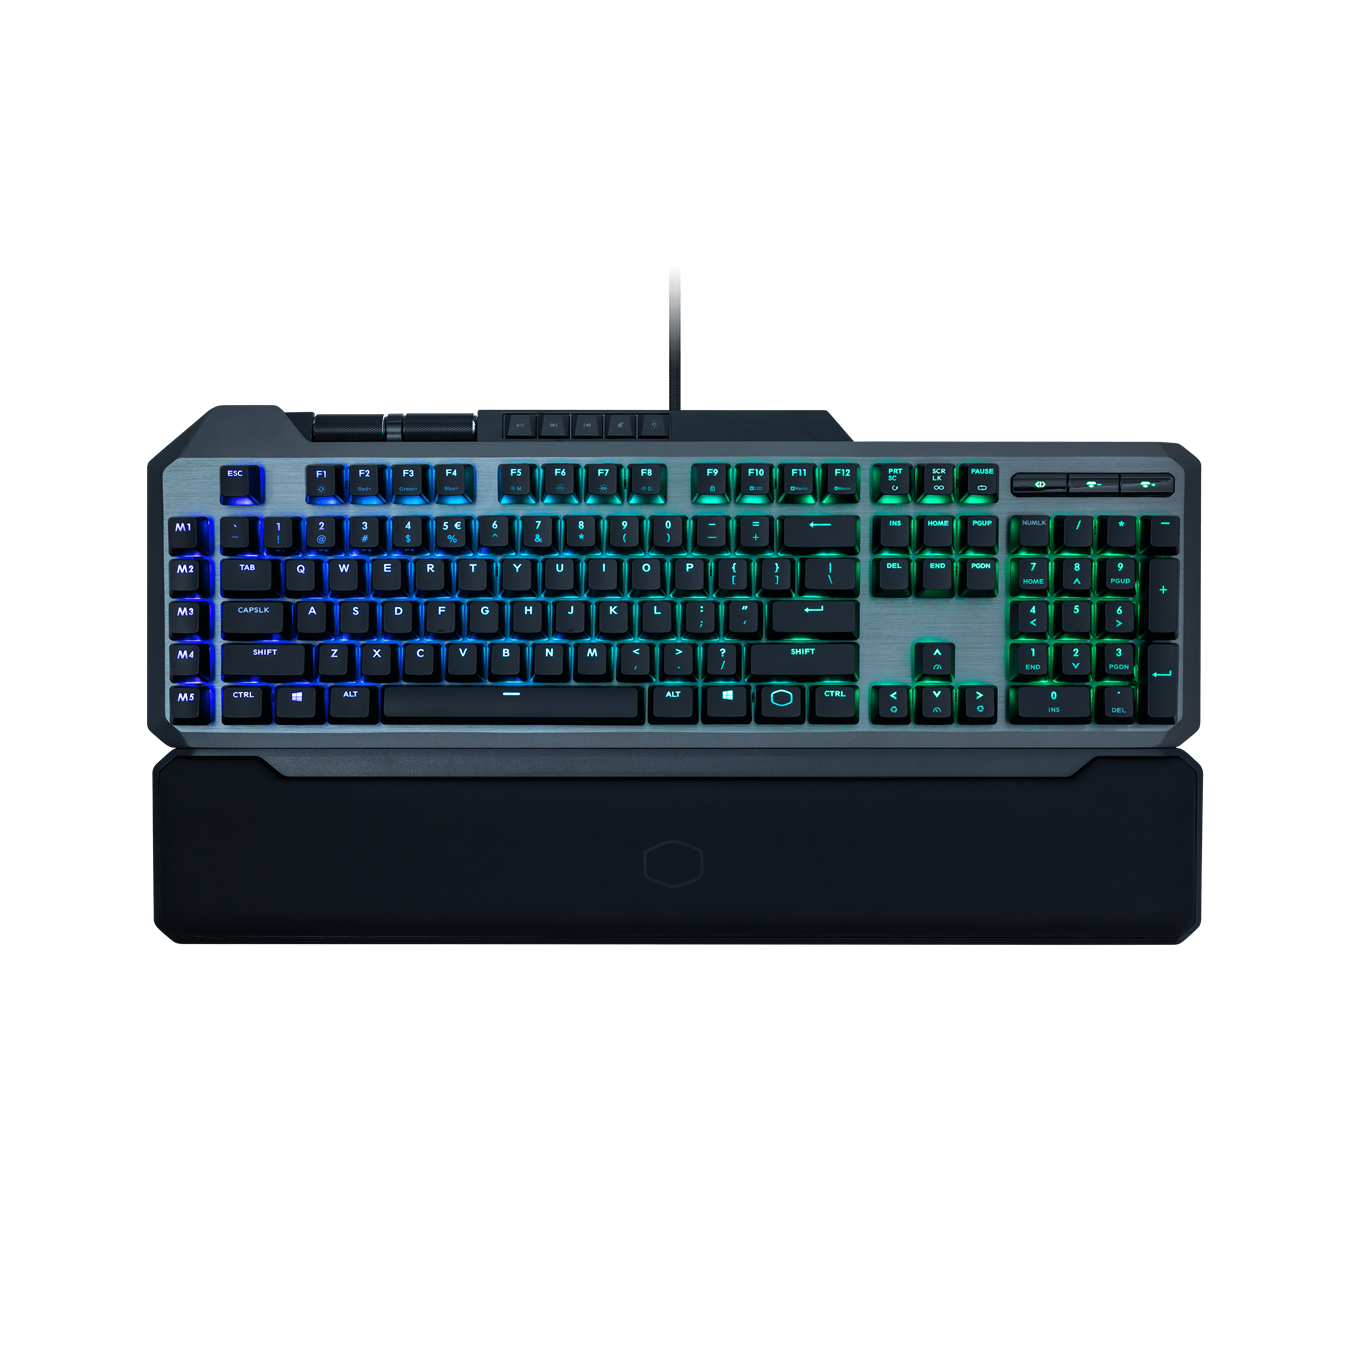 Full RGB per key illumination and understated lightbar makes this keyboard a perfect 10 in appearance